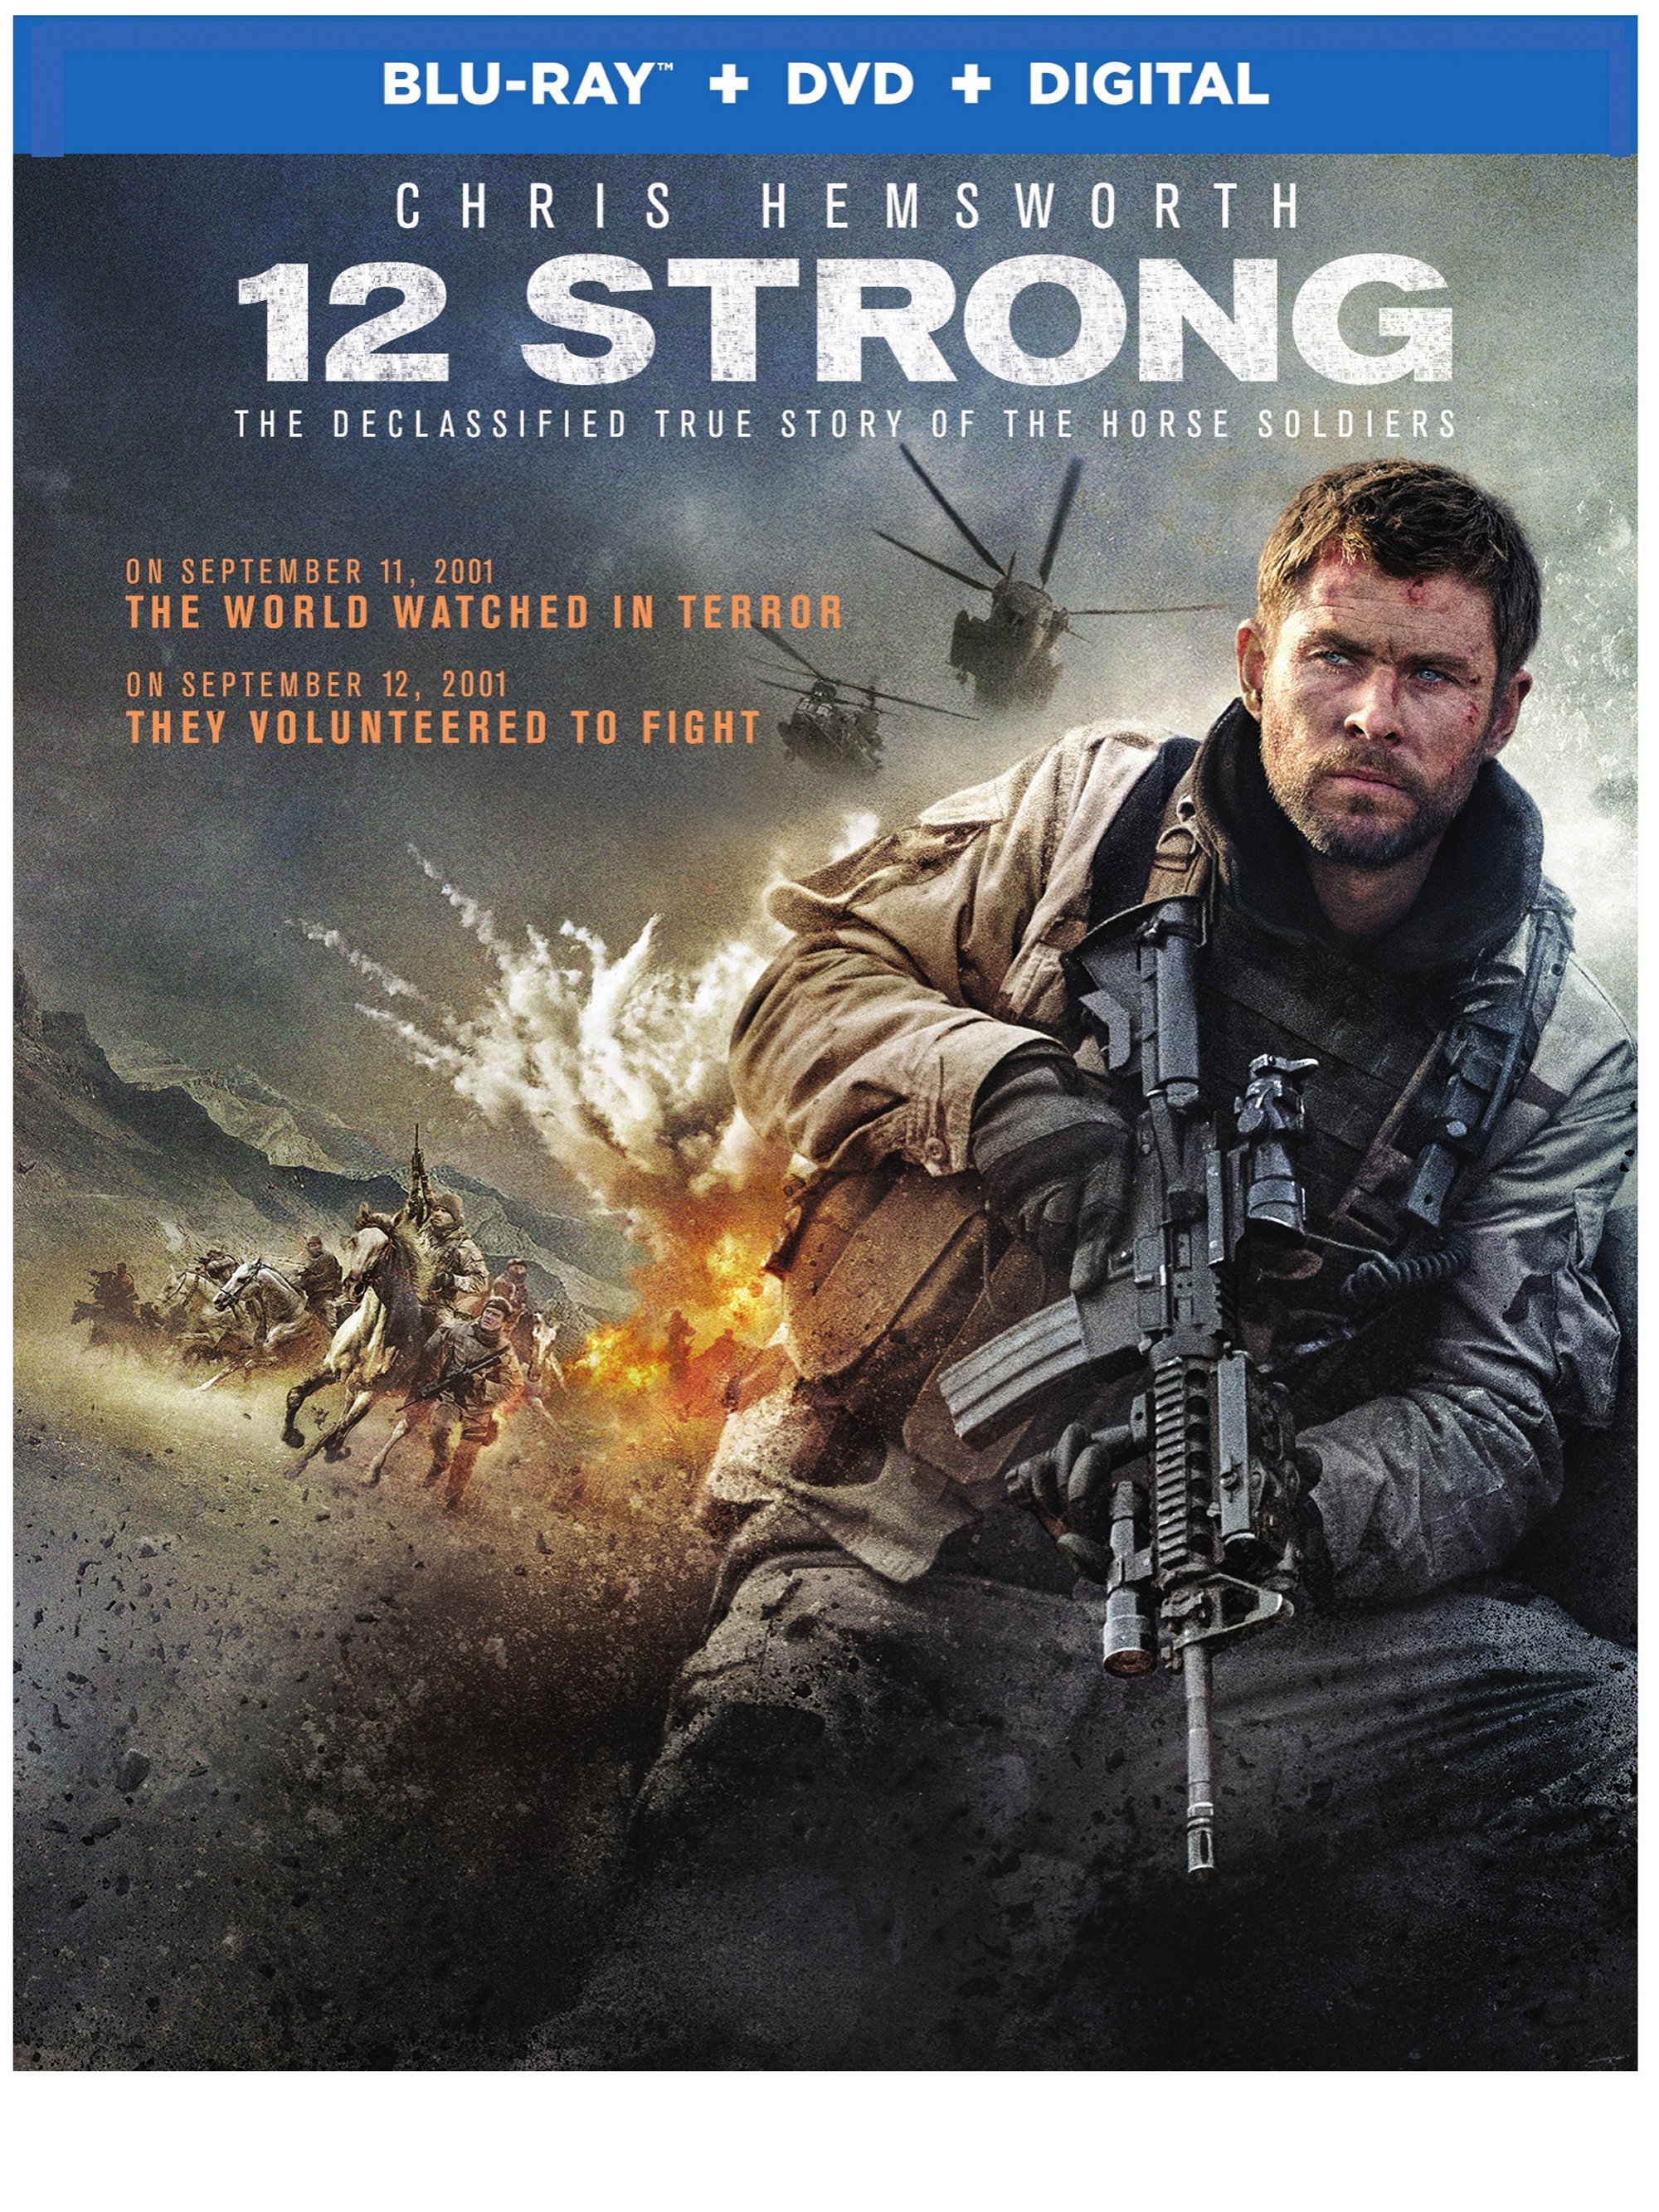 12 Strong Blu-Ray Combo Pack cover (Warner Bros. Home Entertainment)